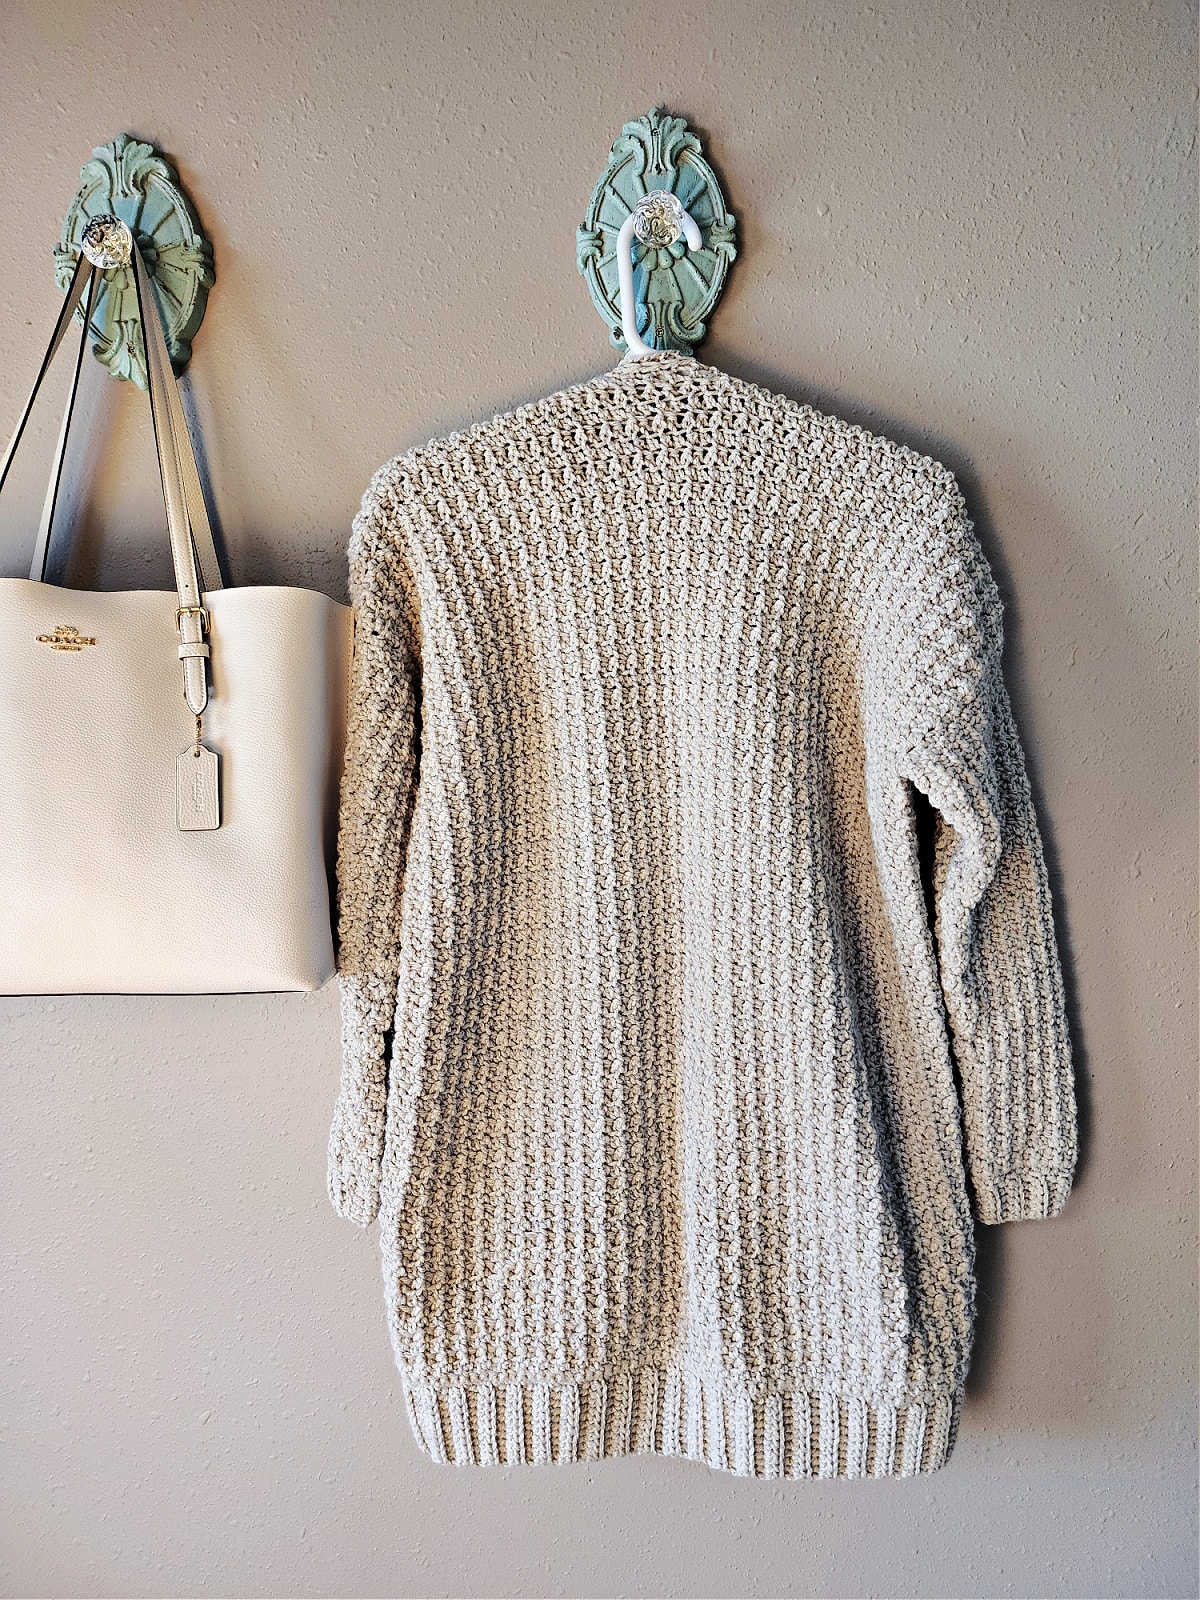 Back of cabled cardigan hanging on coat hanger next to purse.